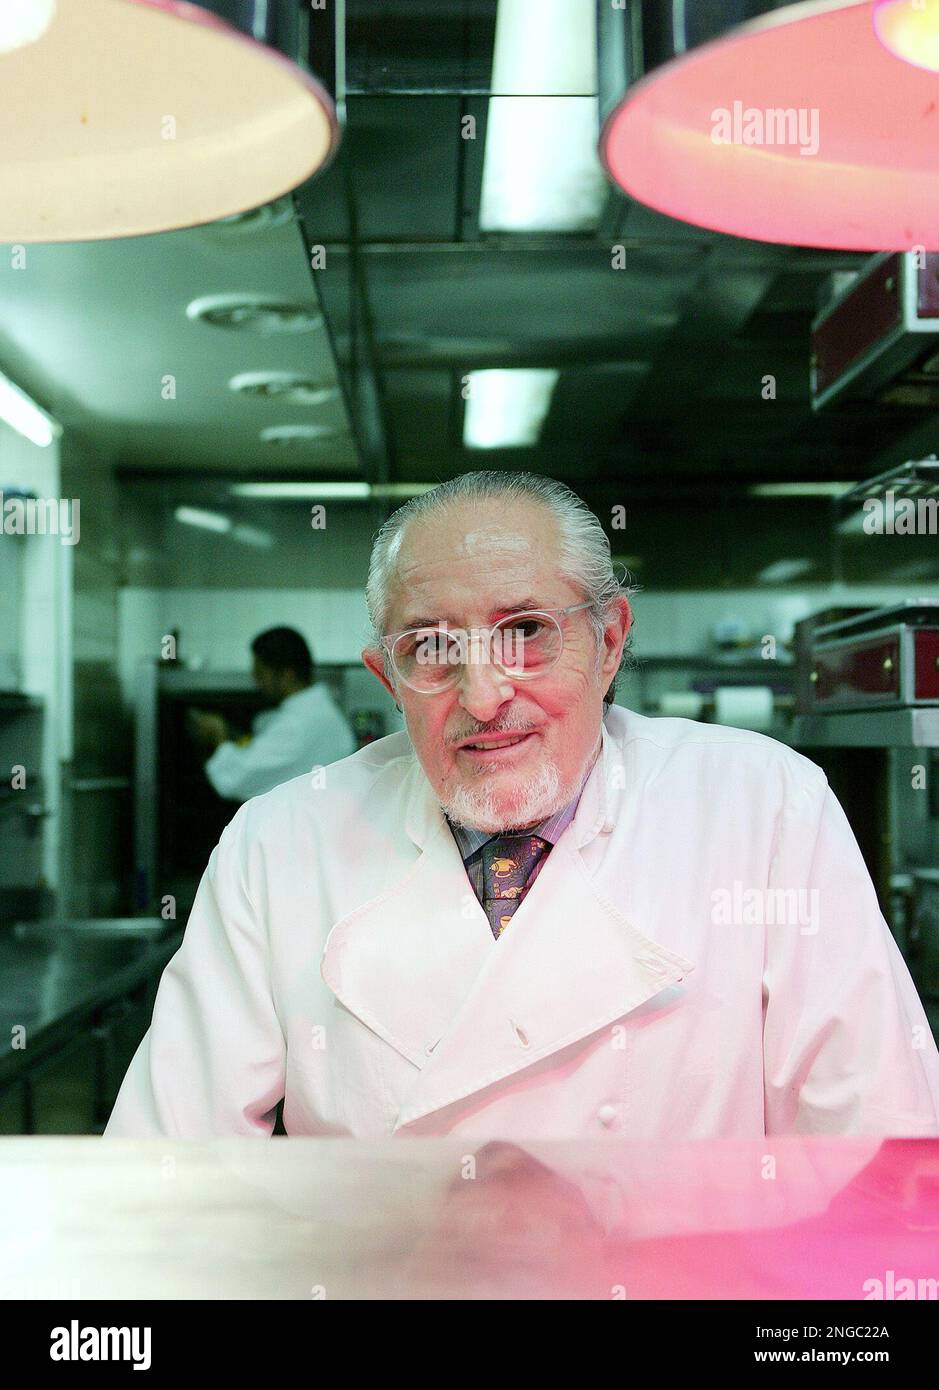 https://c8.alamy.com/compfr/2ngc22a/top-french-chef-alain-senderens-65-is-photographed-in-the-kitchen-of-his-parisian-restaurant-lucas-carton-friday-may-20-2005-senderens-said-he-was-giving-up-his-top-rating-of-three-stars-in-the-famed-michelin-restaurant-guide-to-break-away-from-competition-in-the-kitchen-ap-photo-jacques-brinon-2ngc22a.jpg